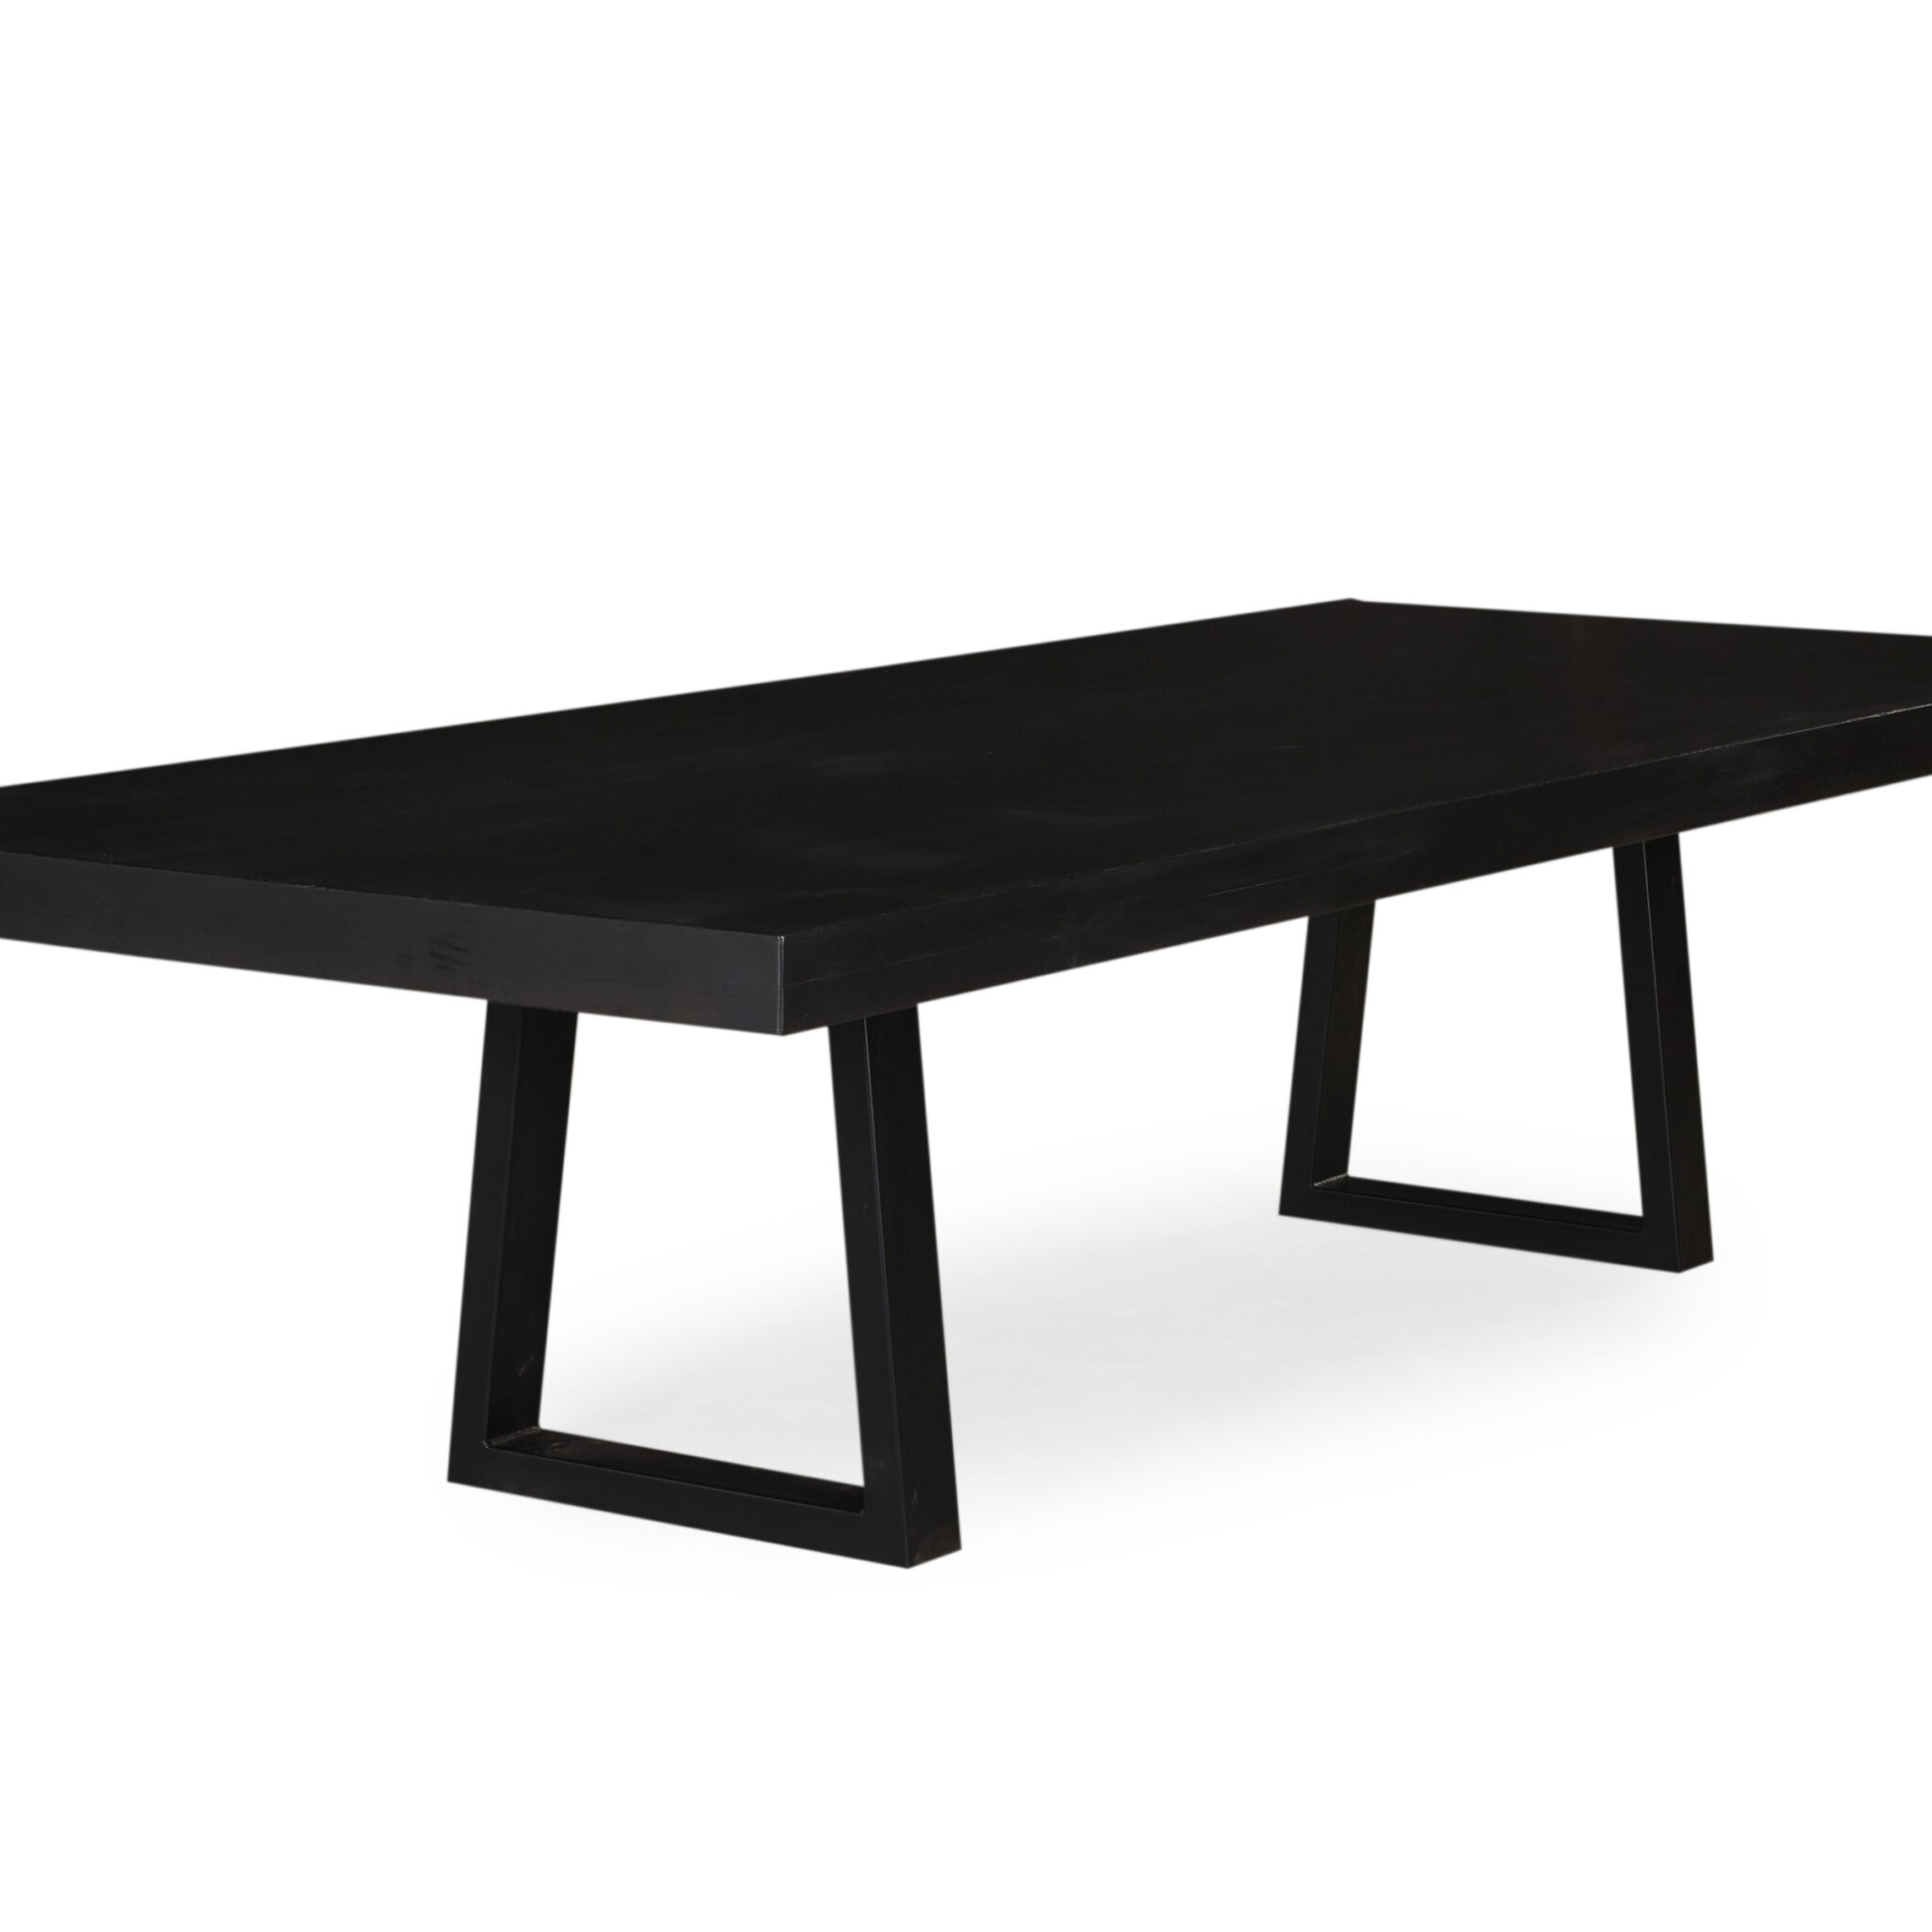 Canterbury Dining Table - American Oak with Brushed Black Finish and Steel Legs